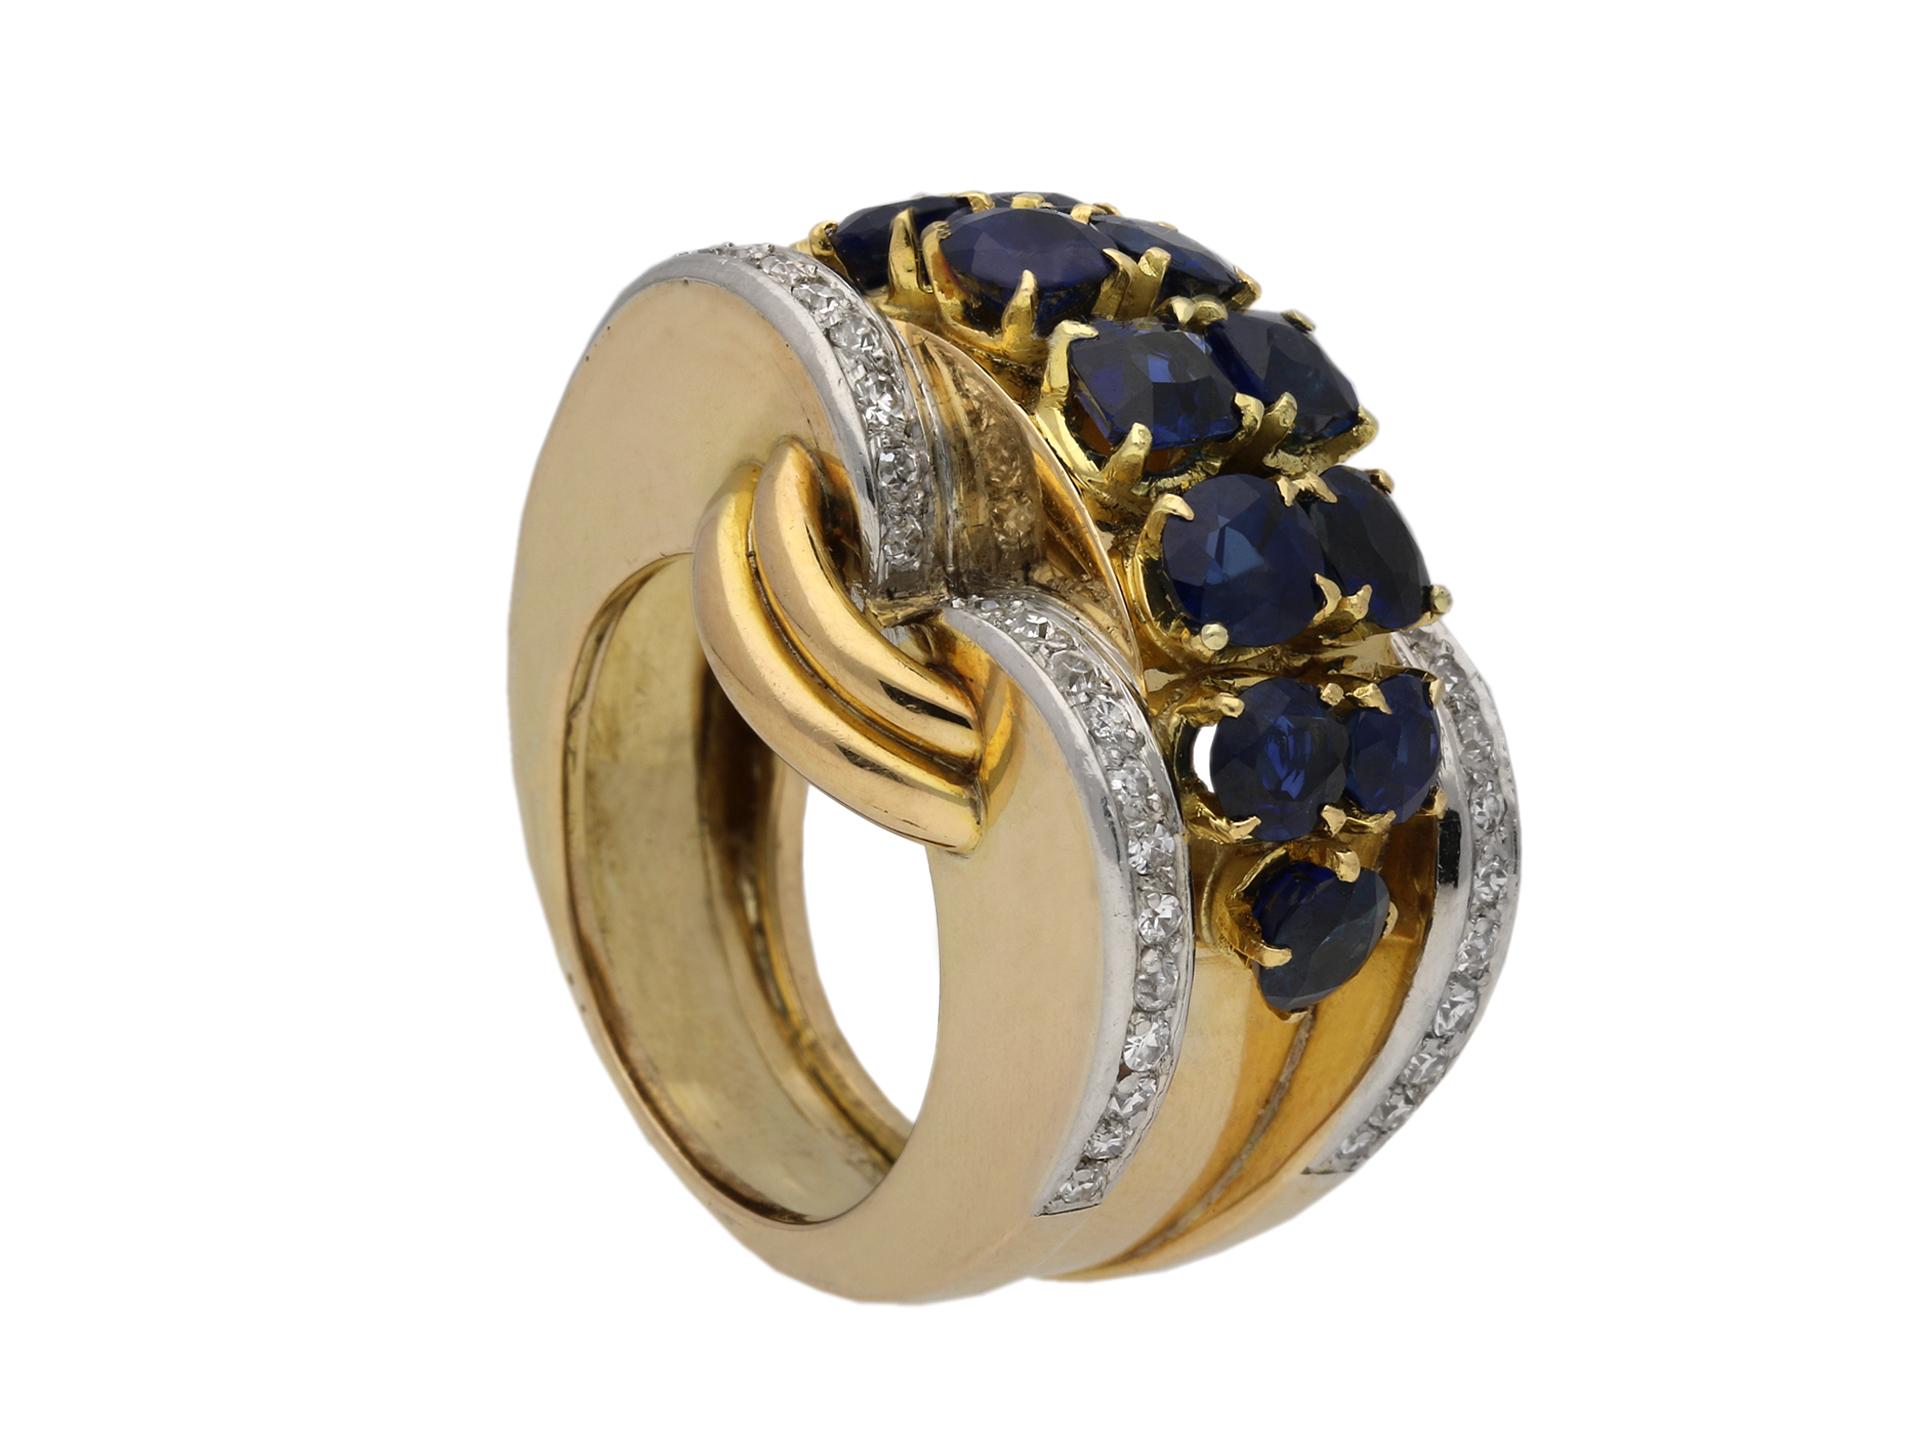 Sapphire and diamond cocktail ring, French, circa 1945. A rose gold and platinum ring with heavy protruding bezel set with a horizontal double row of twelve round old cut sapphires in yellow gold claw settings with an approximate total weight of